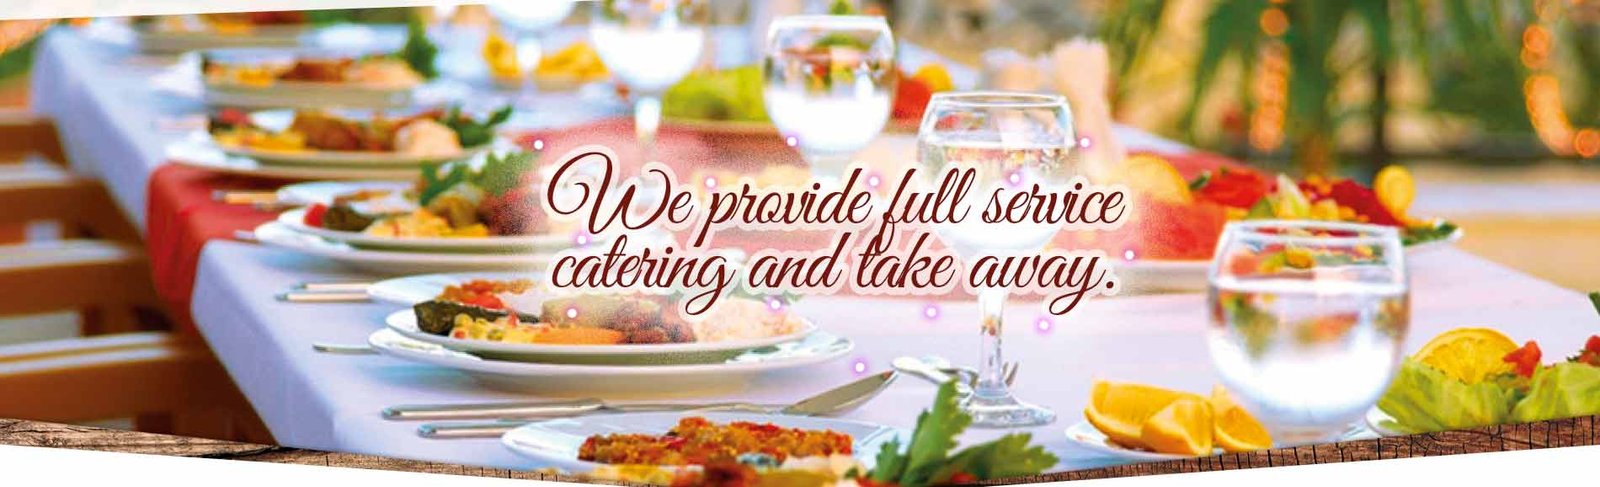 Catering menus for weddings in Lancaster County - Lincoln, NE